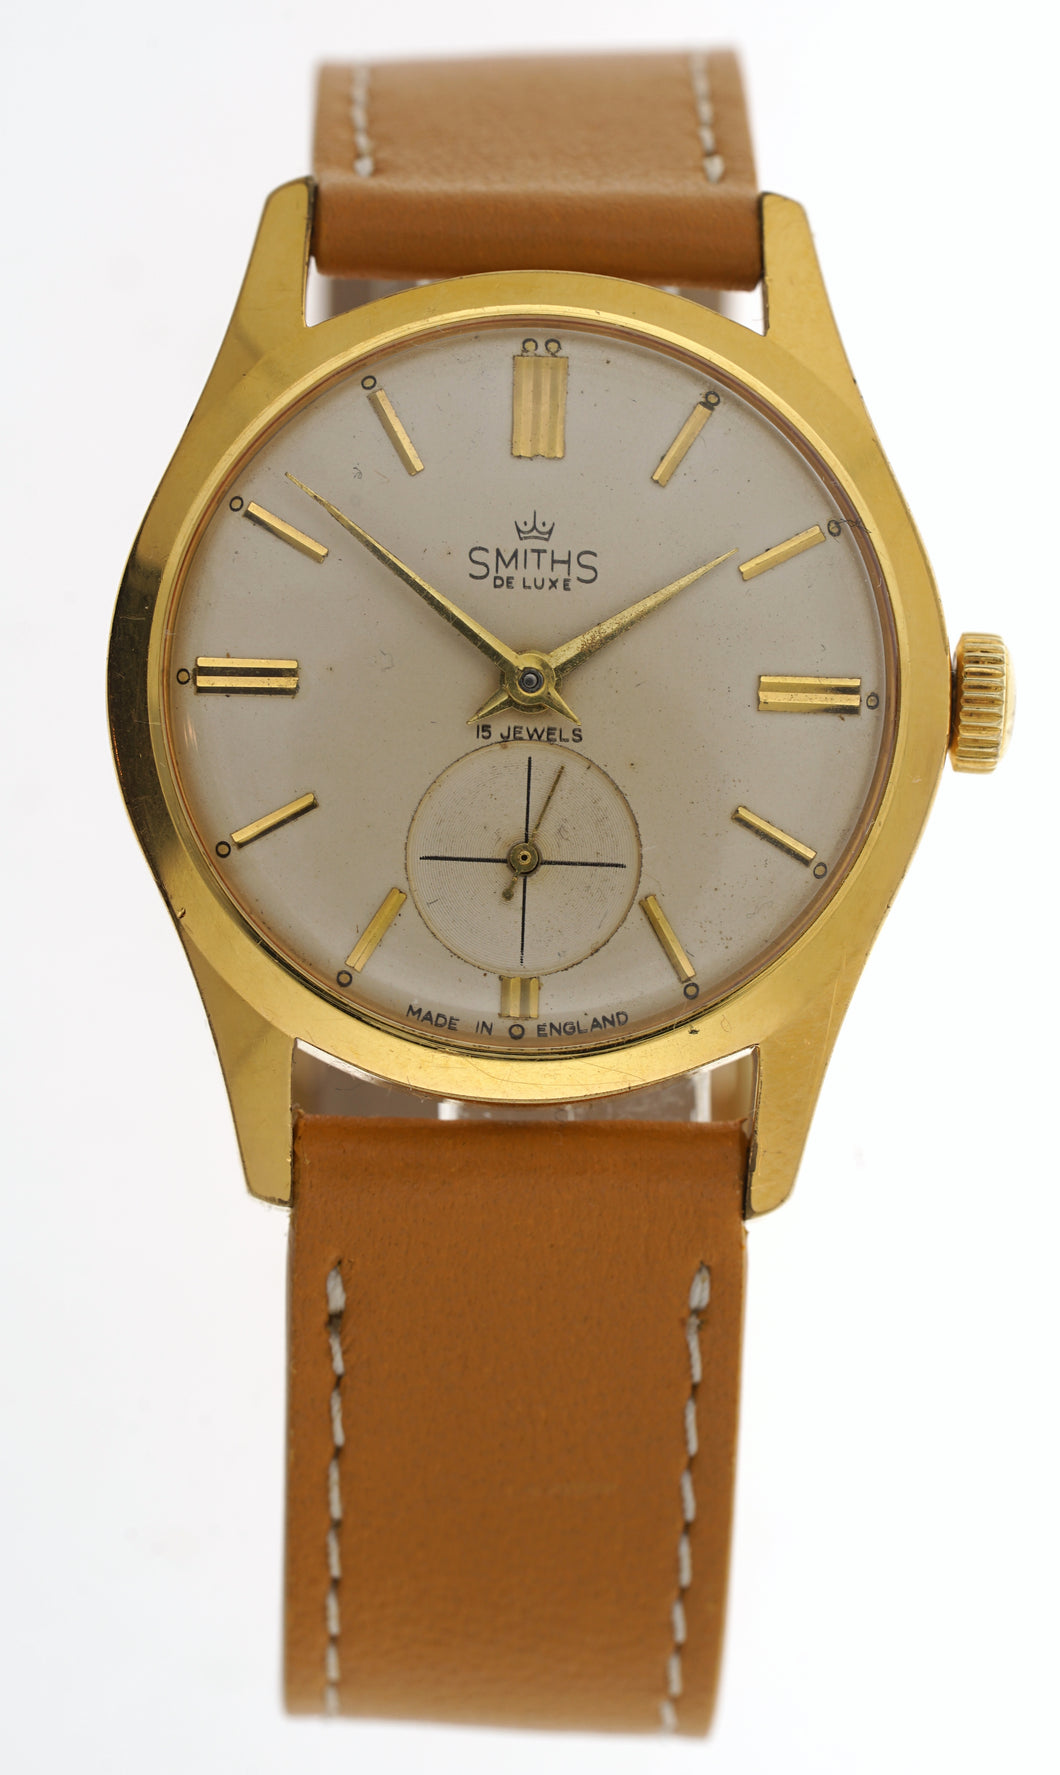 Deluxe Smiths Gents Gold Plated Watch 50s Excellent Condition